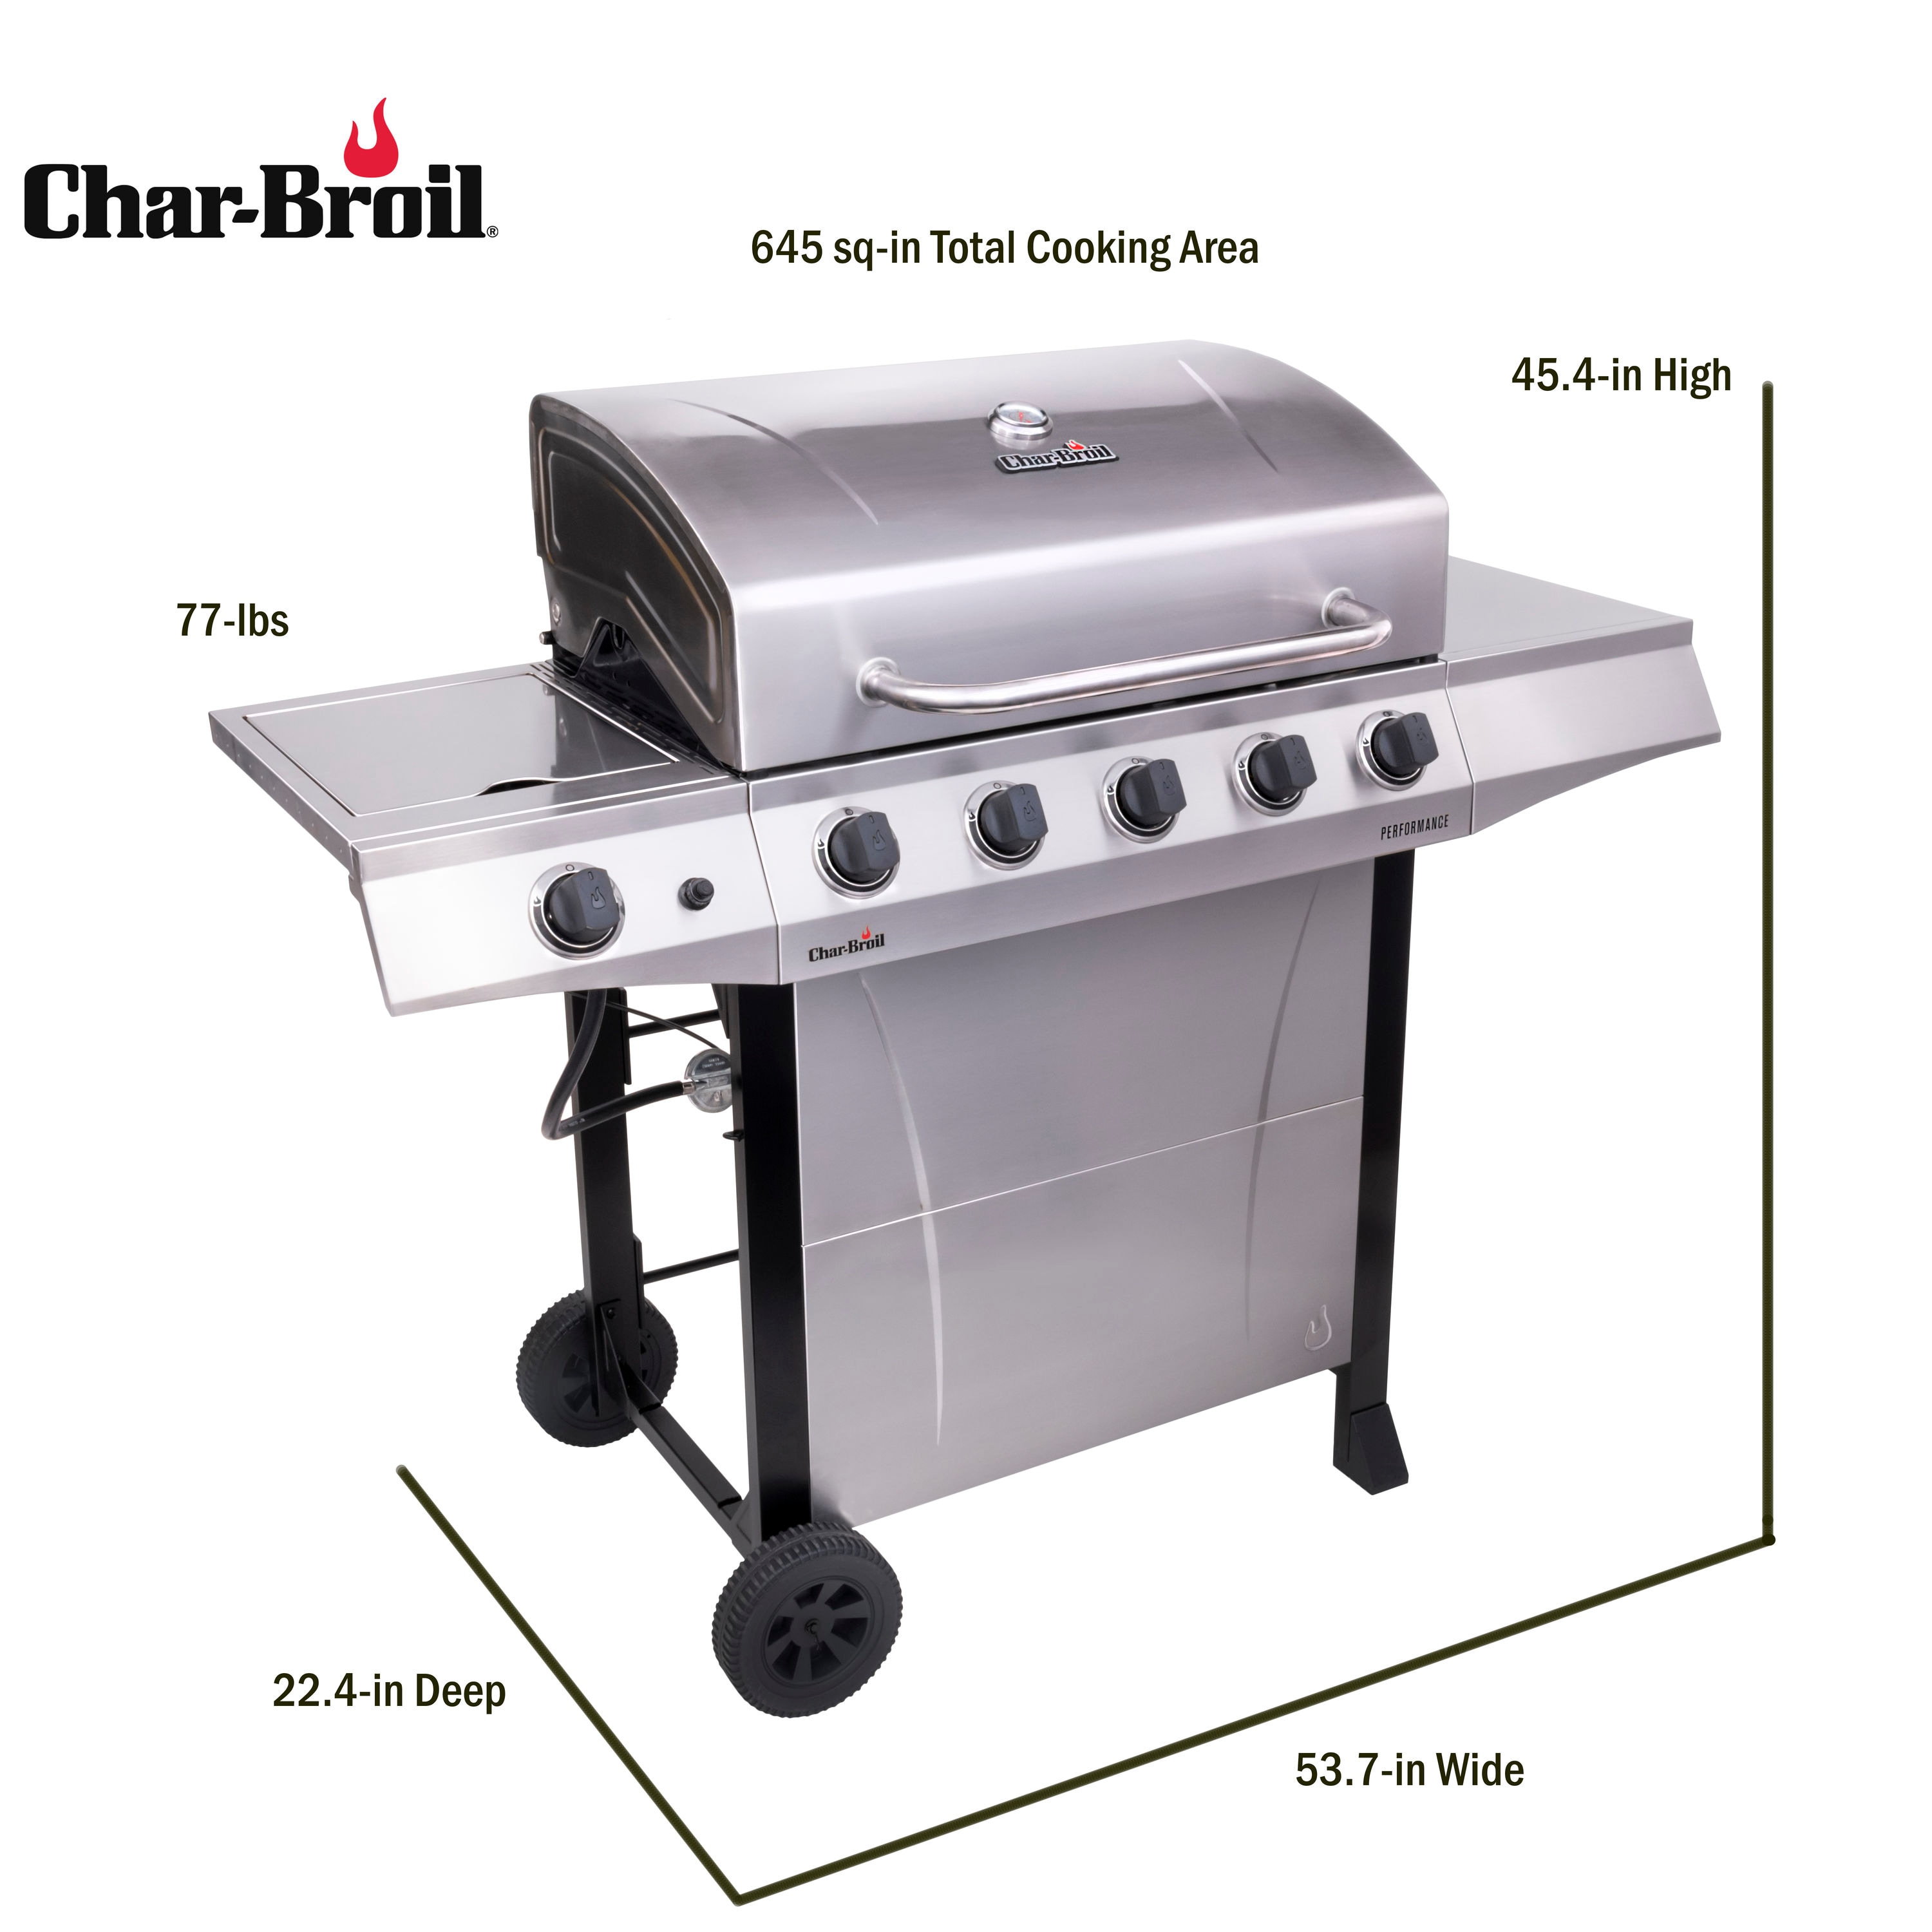 Char-Broil Performance Series Silver 5-Burner Liquid Propane Gas Grill with 1 Side Burner in the Grills department at Lowes.com